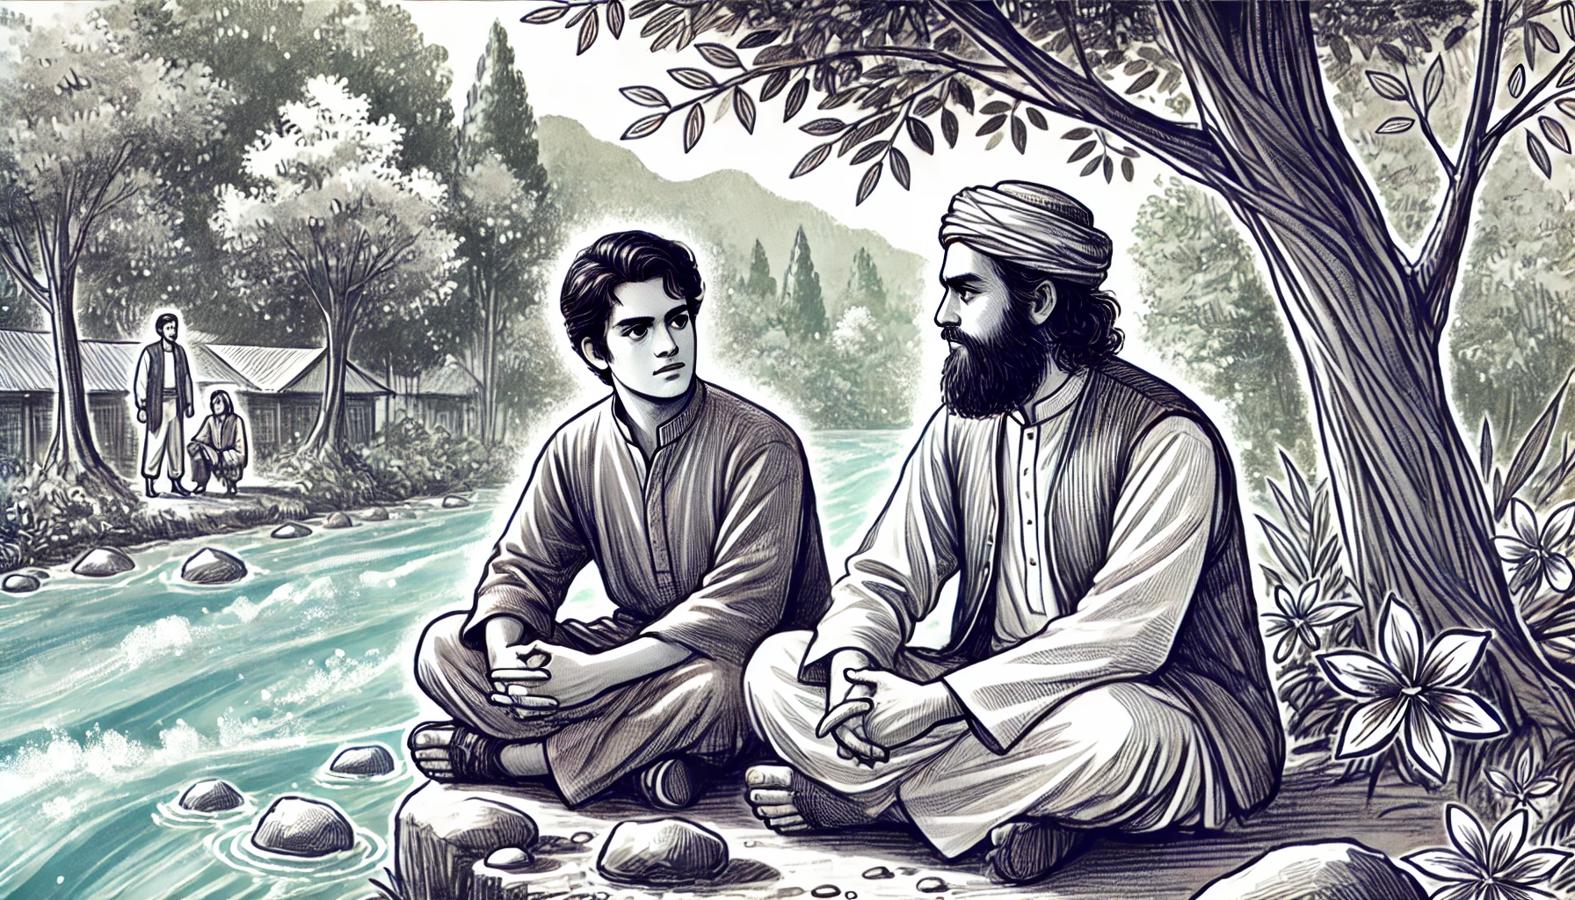 Abbas and Karim sitting by the river, deep in conversation.